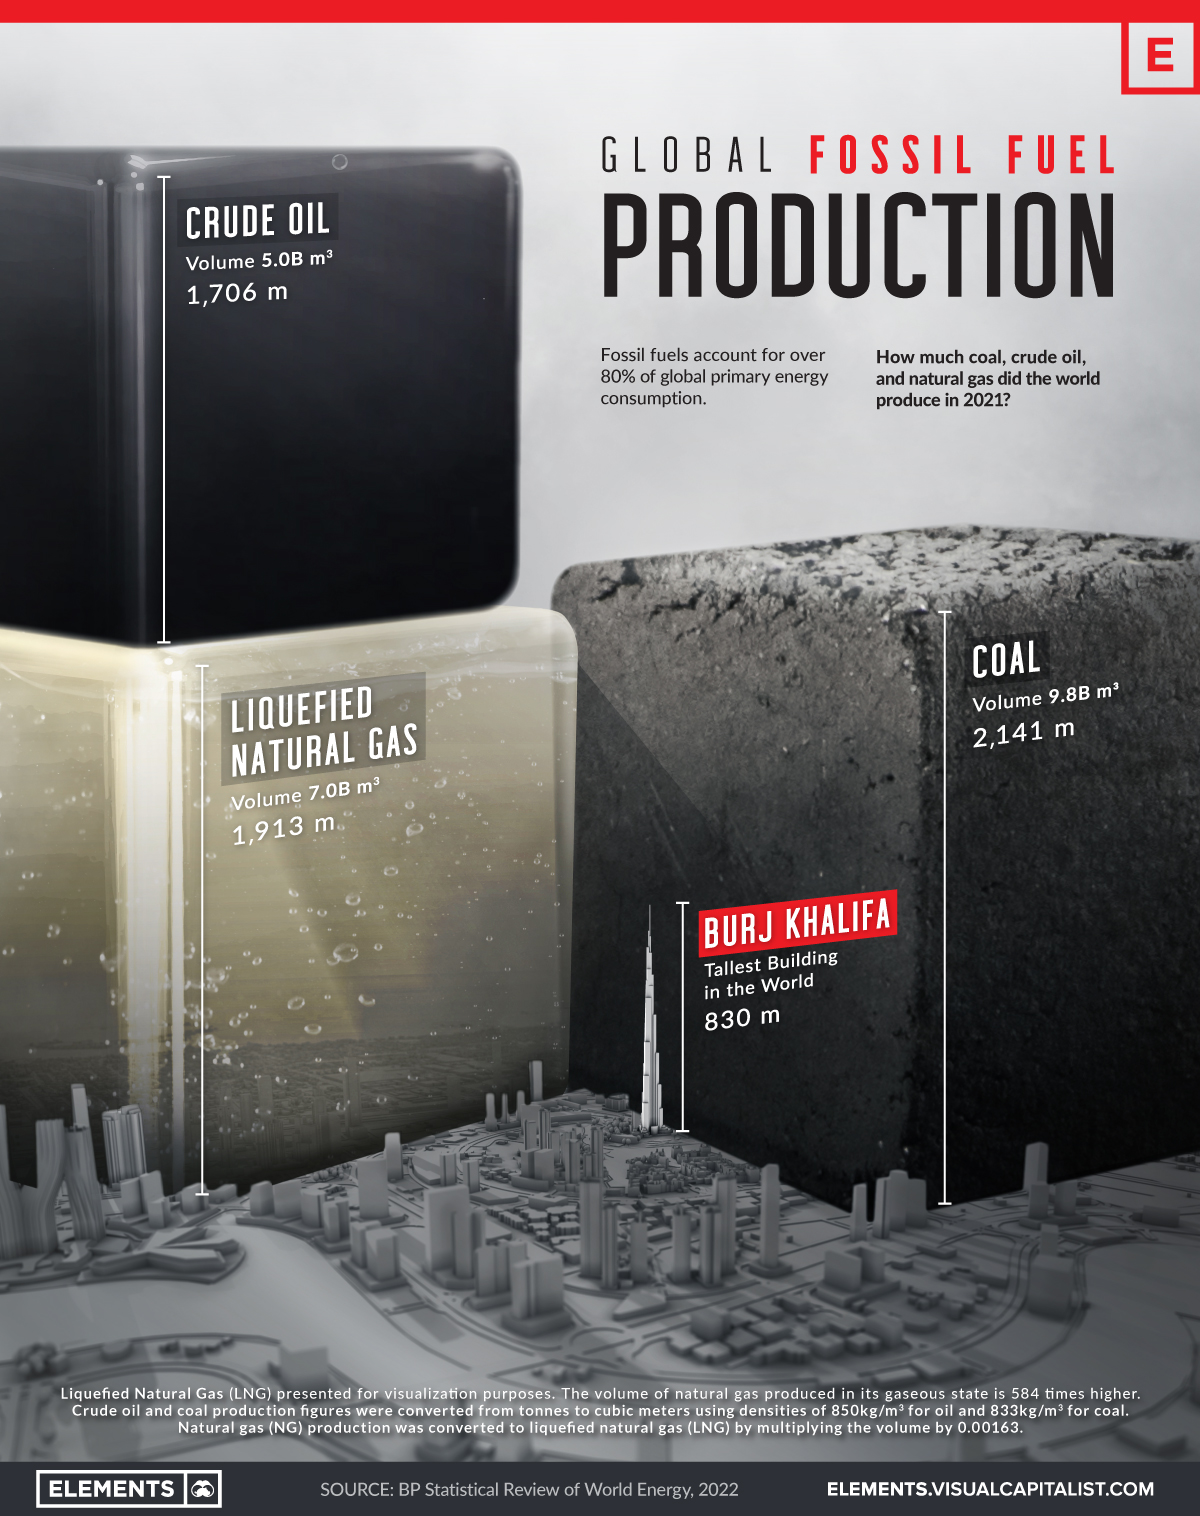 Scale of global fossil fuel production